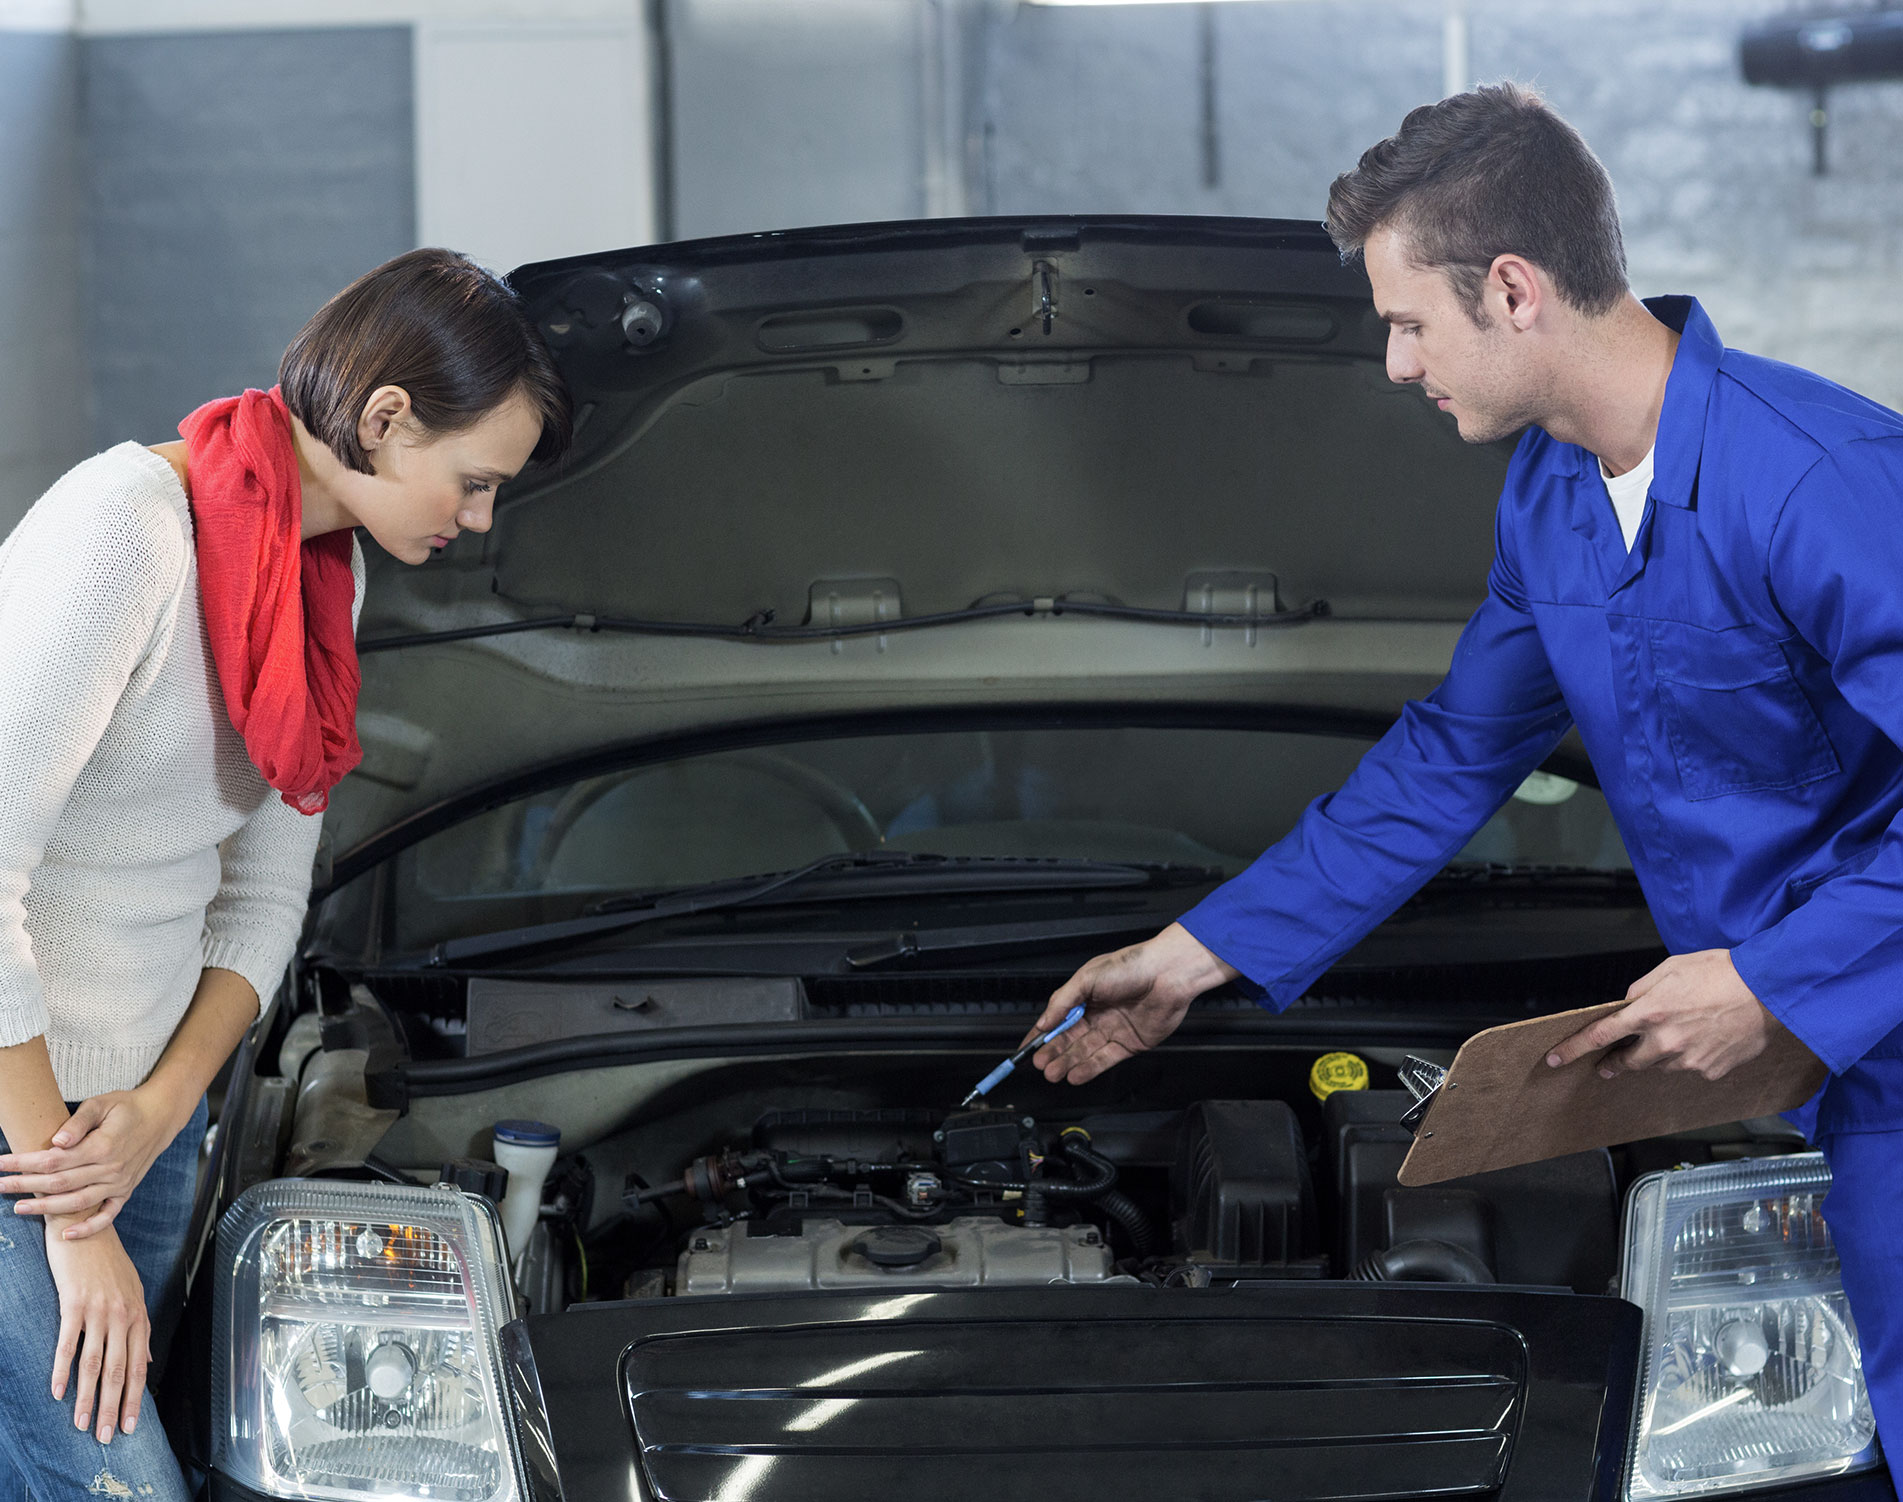 About Car Repair You Should Read And Follow For Your Car